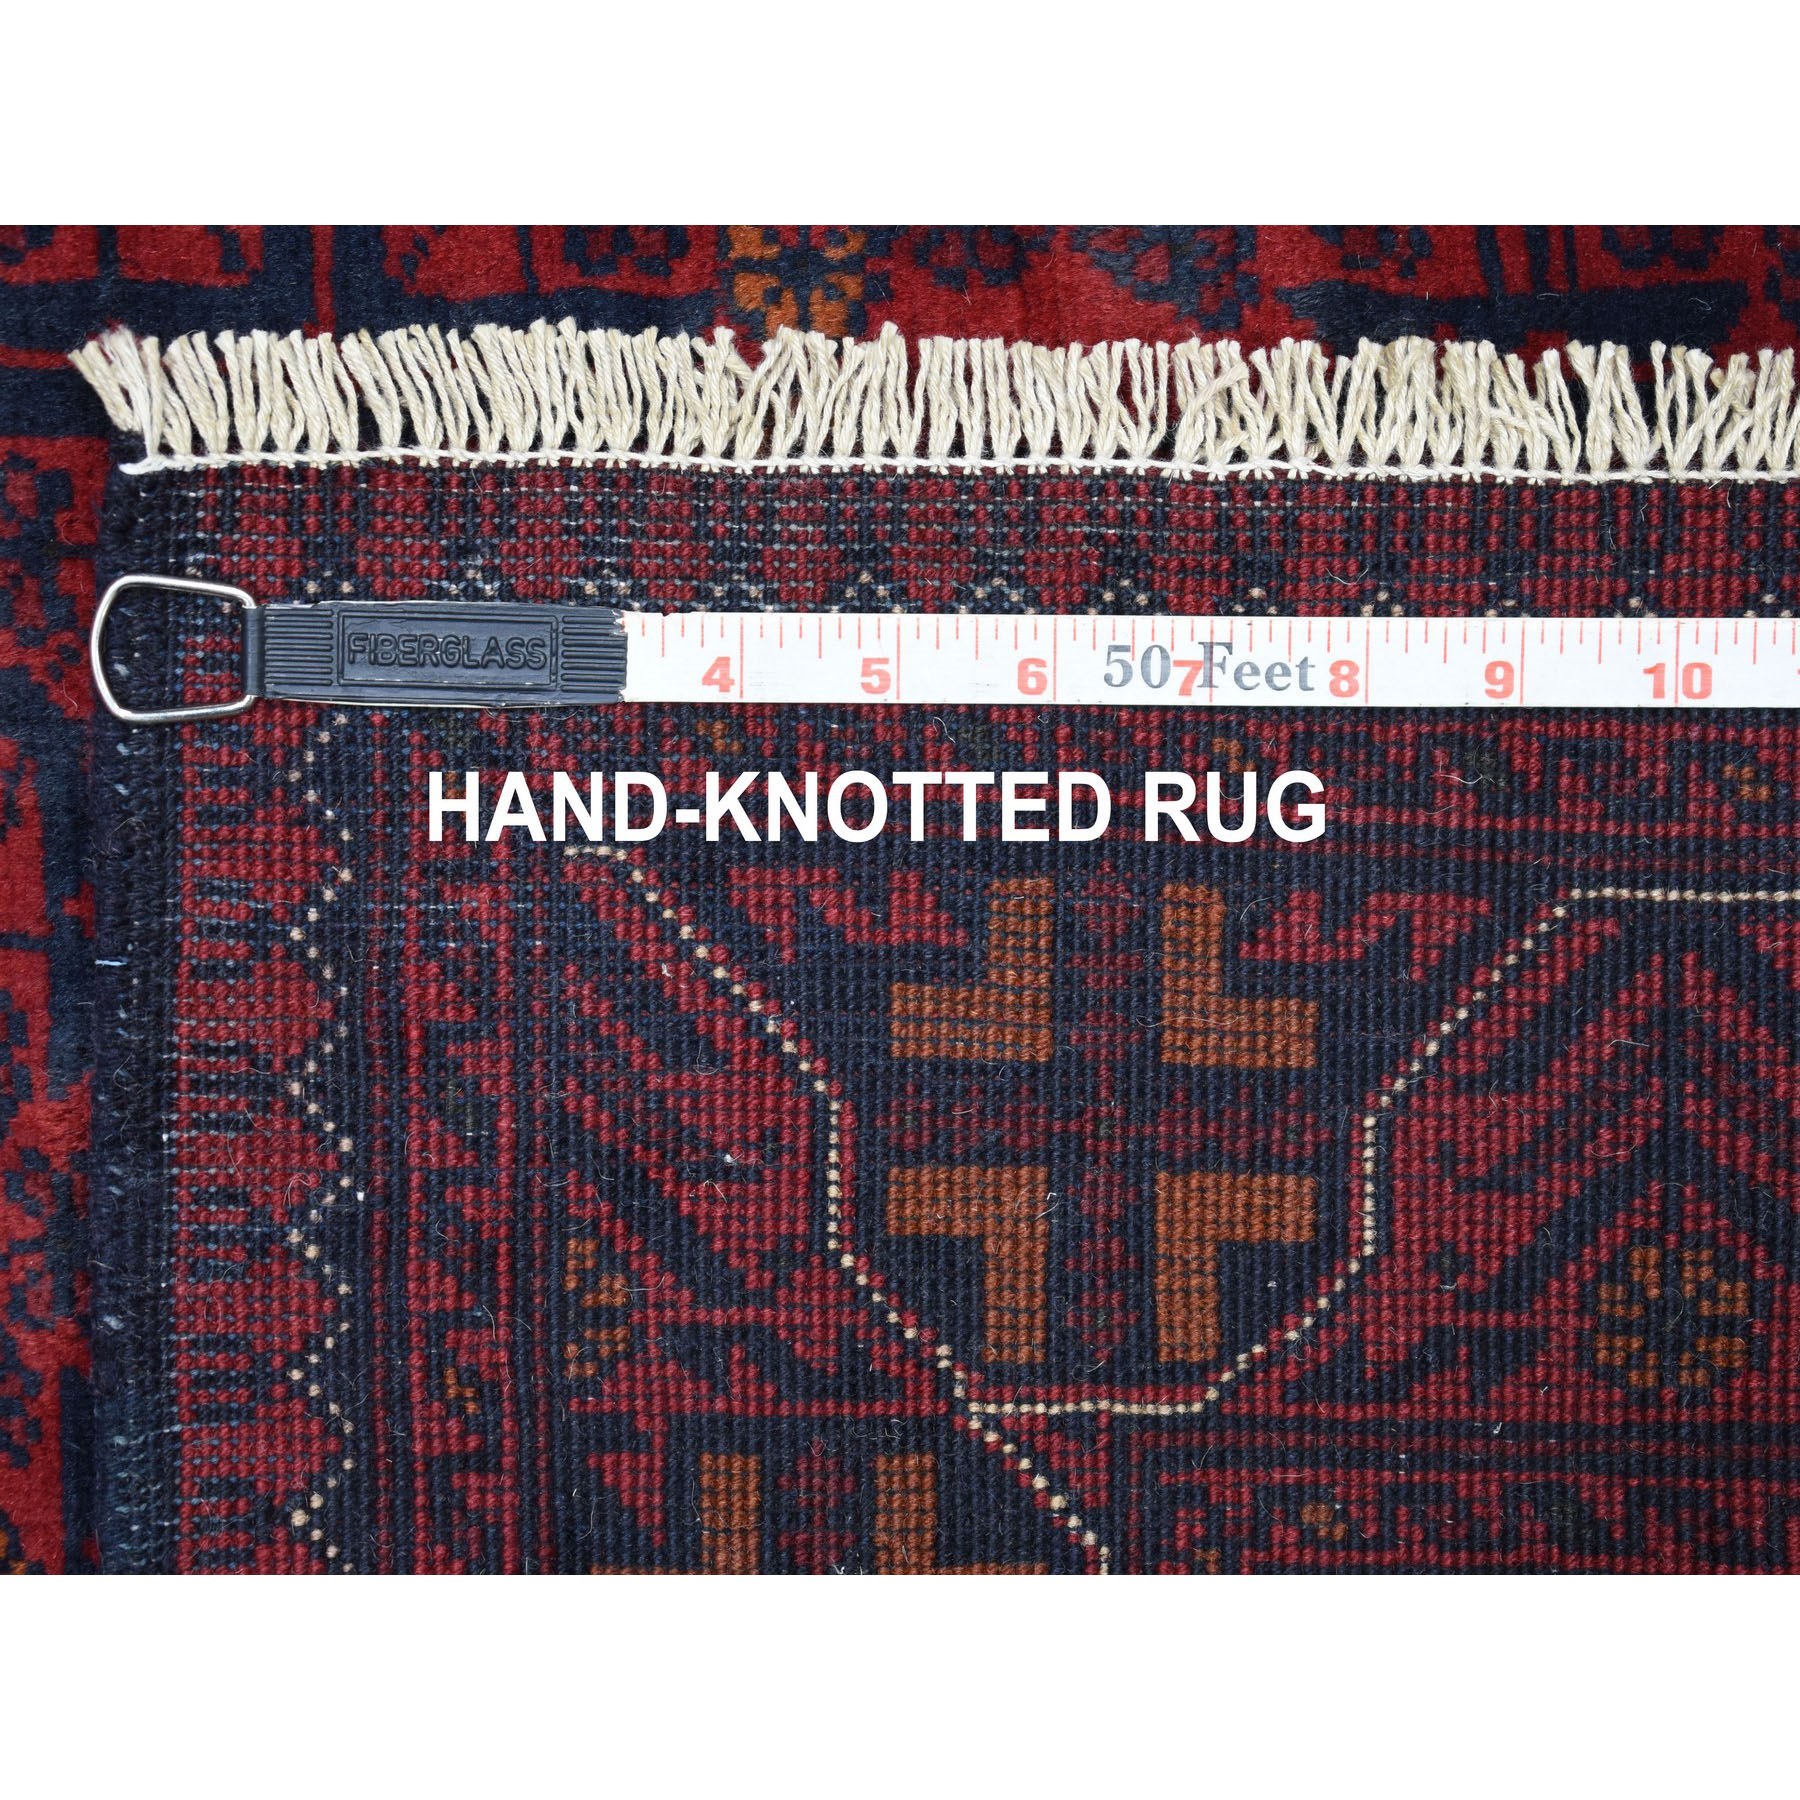 4'2"x6'5" Deep and Saturated Red Hand Woven Afghan Khamyab with Geometric Design Soft Vibrant Wool Oriental Rug 